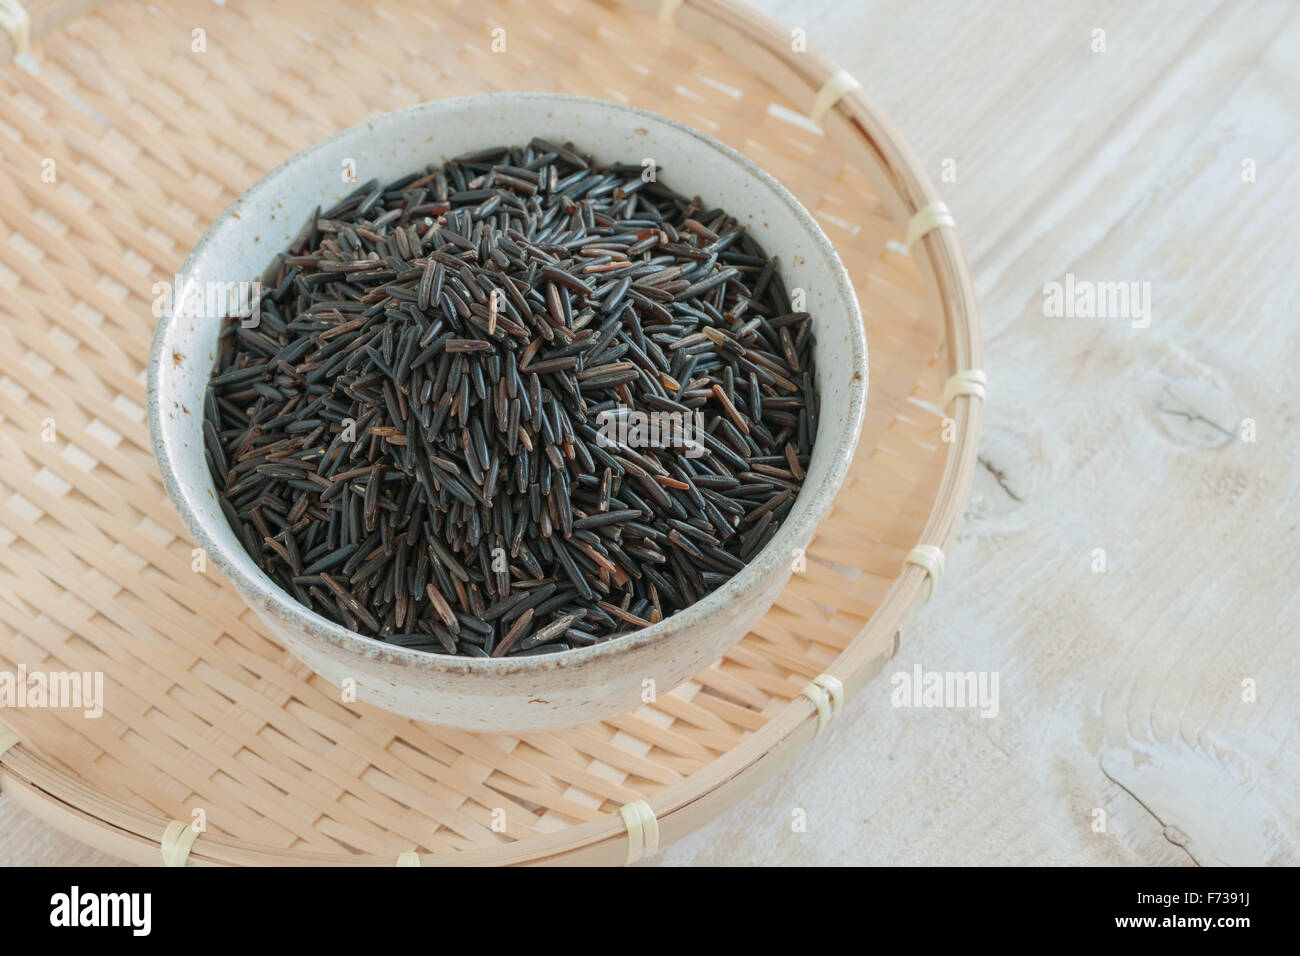 Wild rice also called Canada rice Indian rice and water oats a wild growing variety from North America and Canada Stock Photo